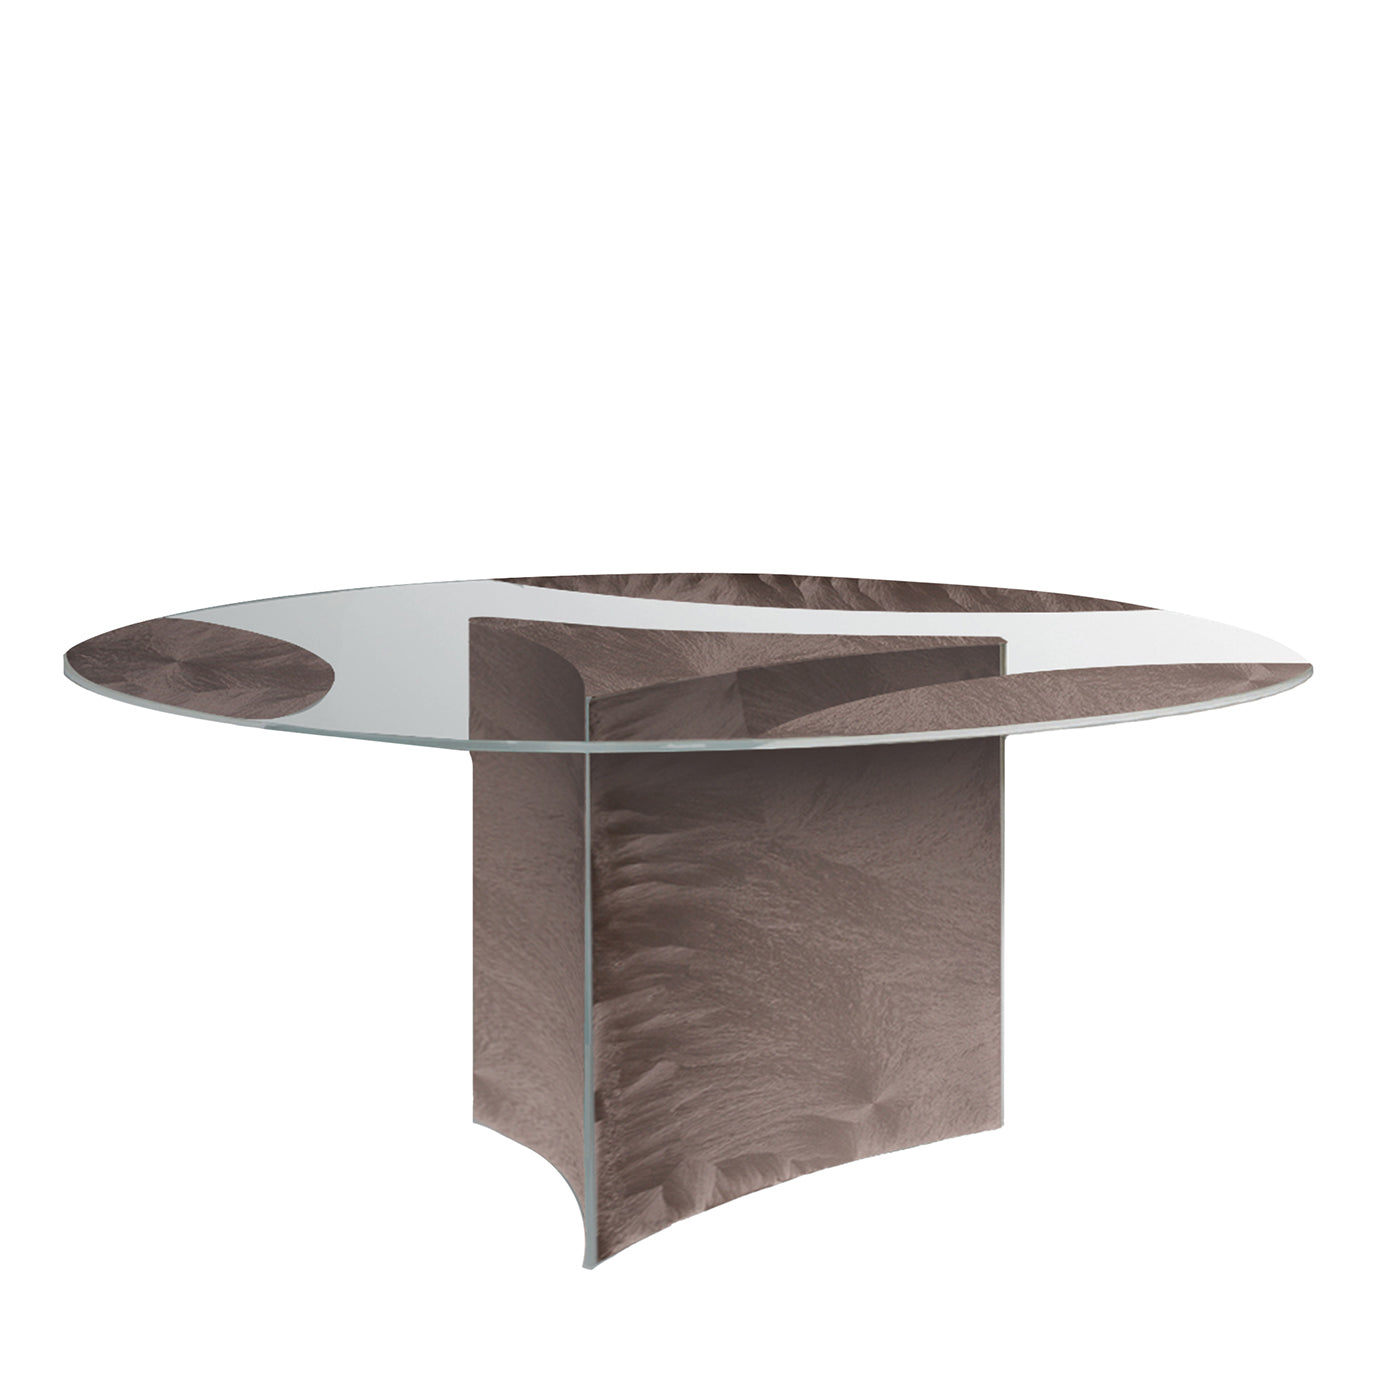 Dionisio Circular Bronze Dining Table by Fabio Casali - Main view